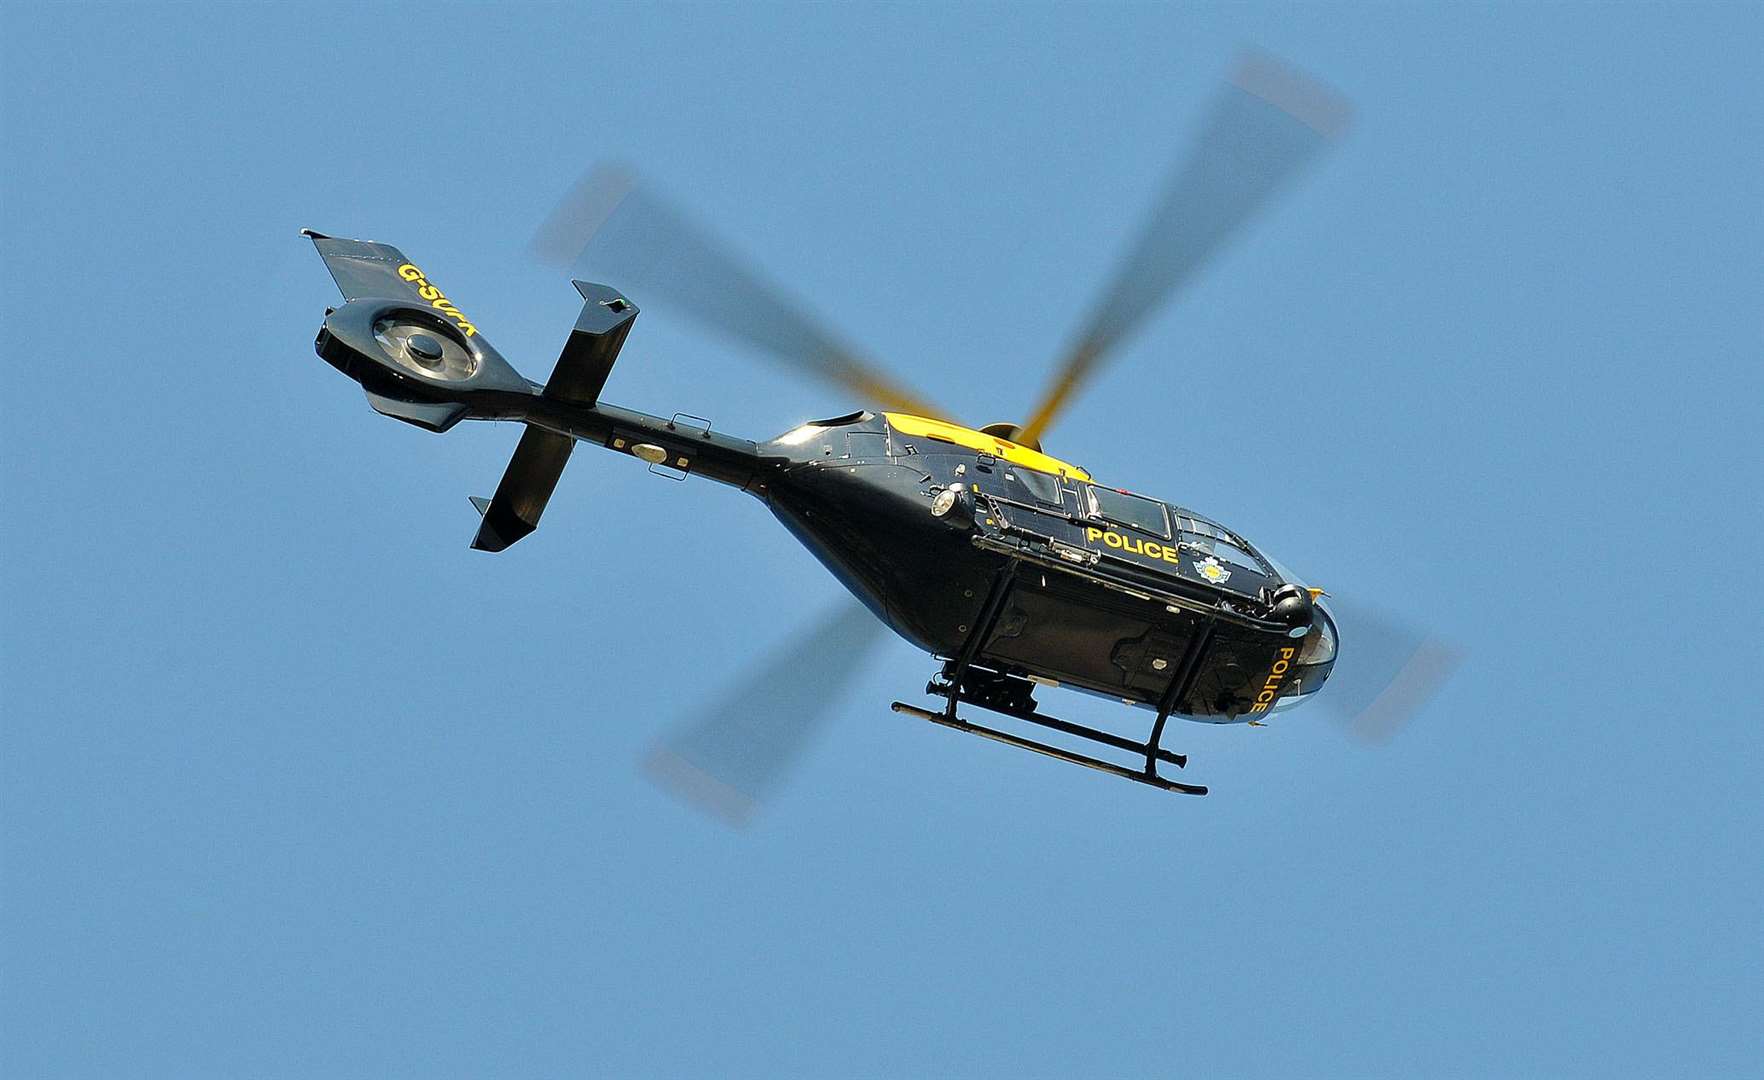 Police Helicopter. (6435343)